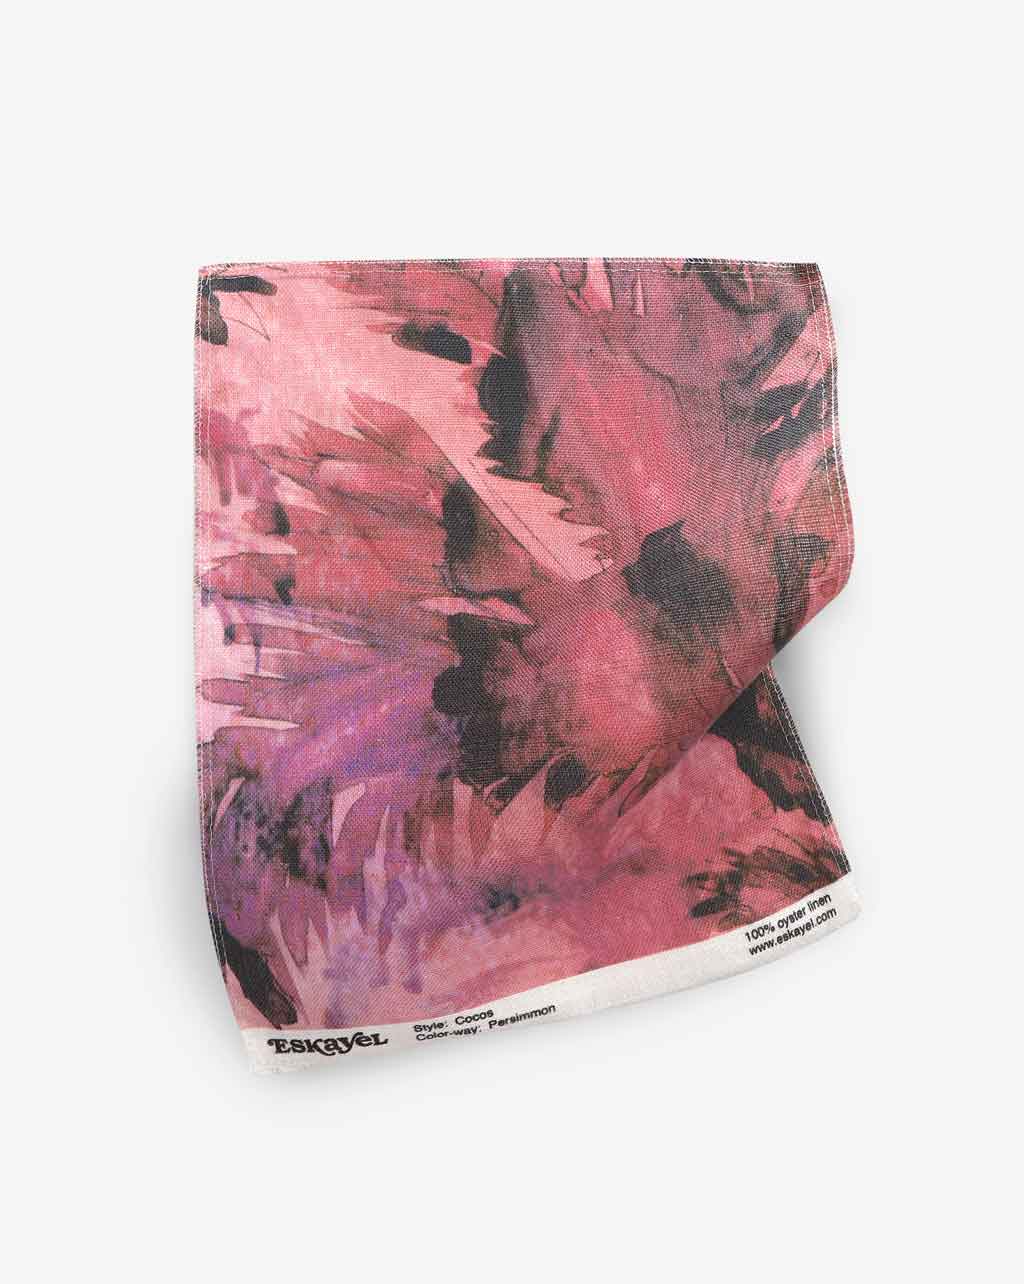 A pink and black painting on a Cocos Fabric Sample Persimmon